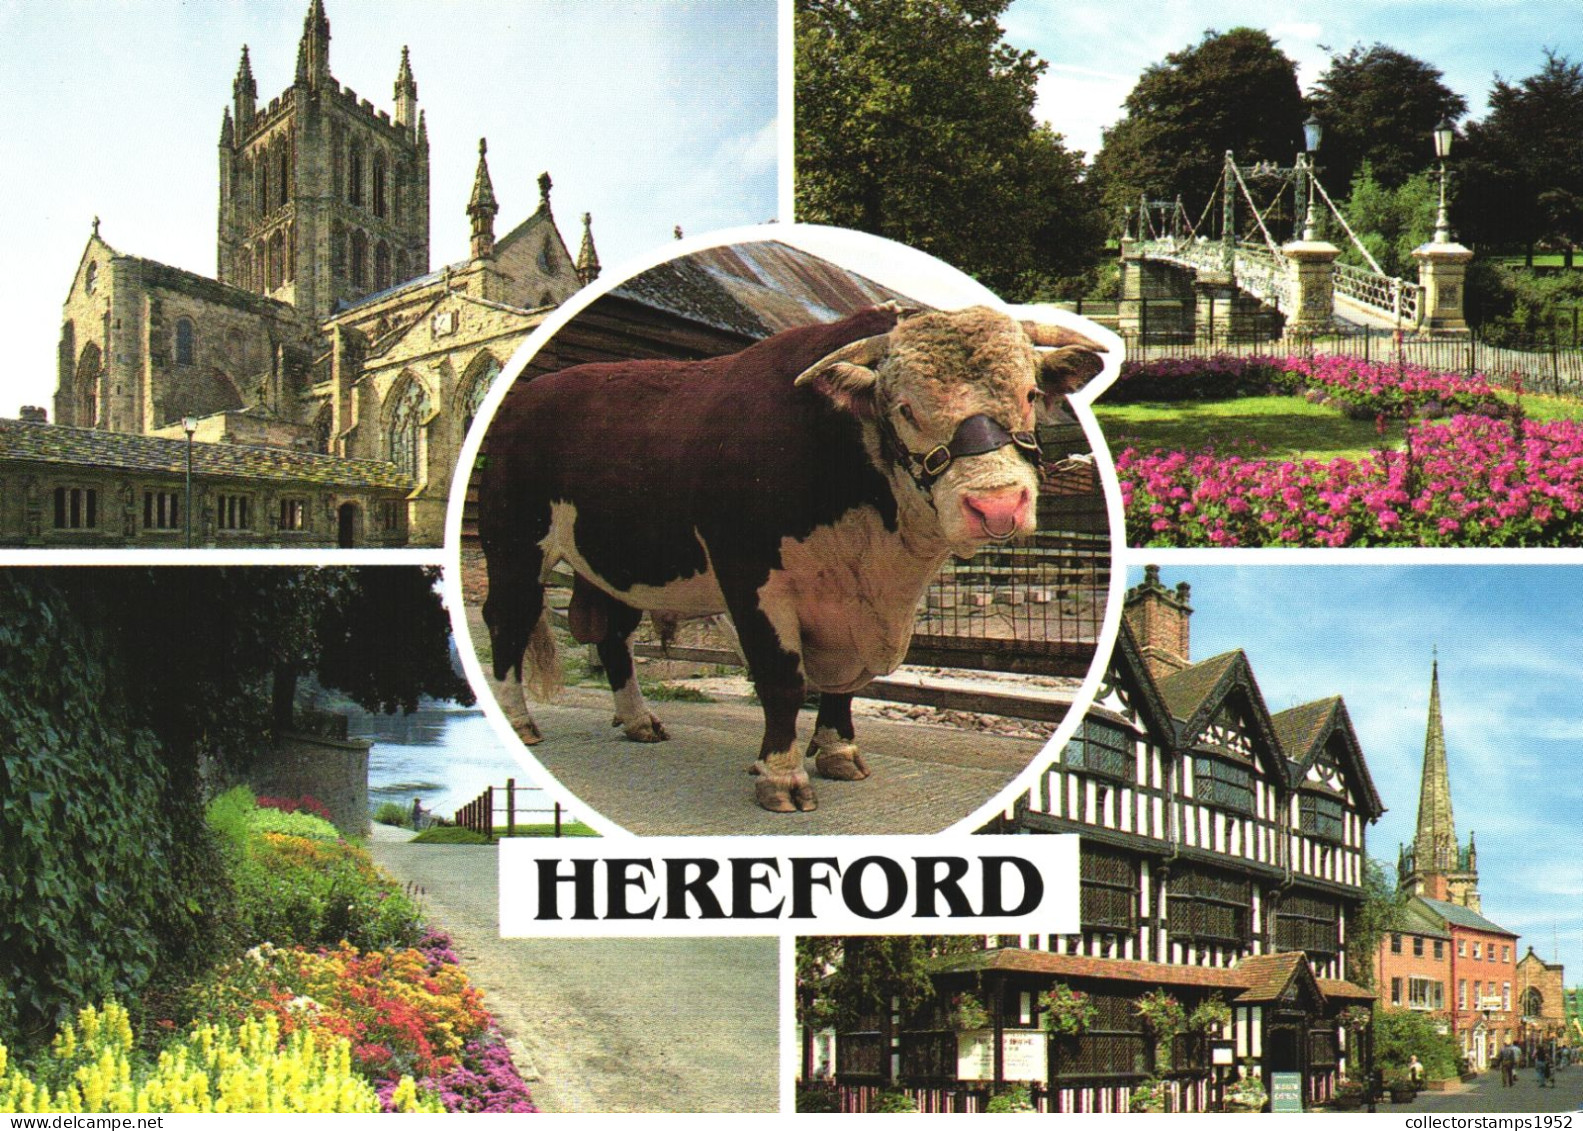 HEREFORD, MULTIPLE VIEWS, COW, BRIDGE, PARK, ARCHITECTURE, CATHEDRAL, UNITED KINGDOM - Herefordshire